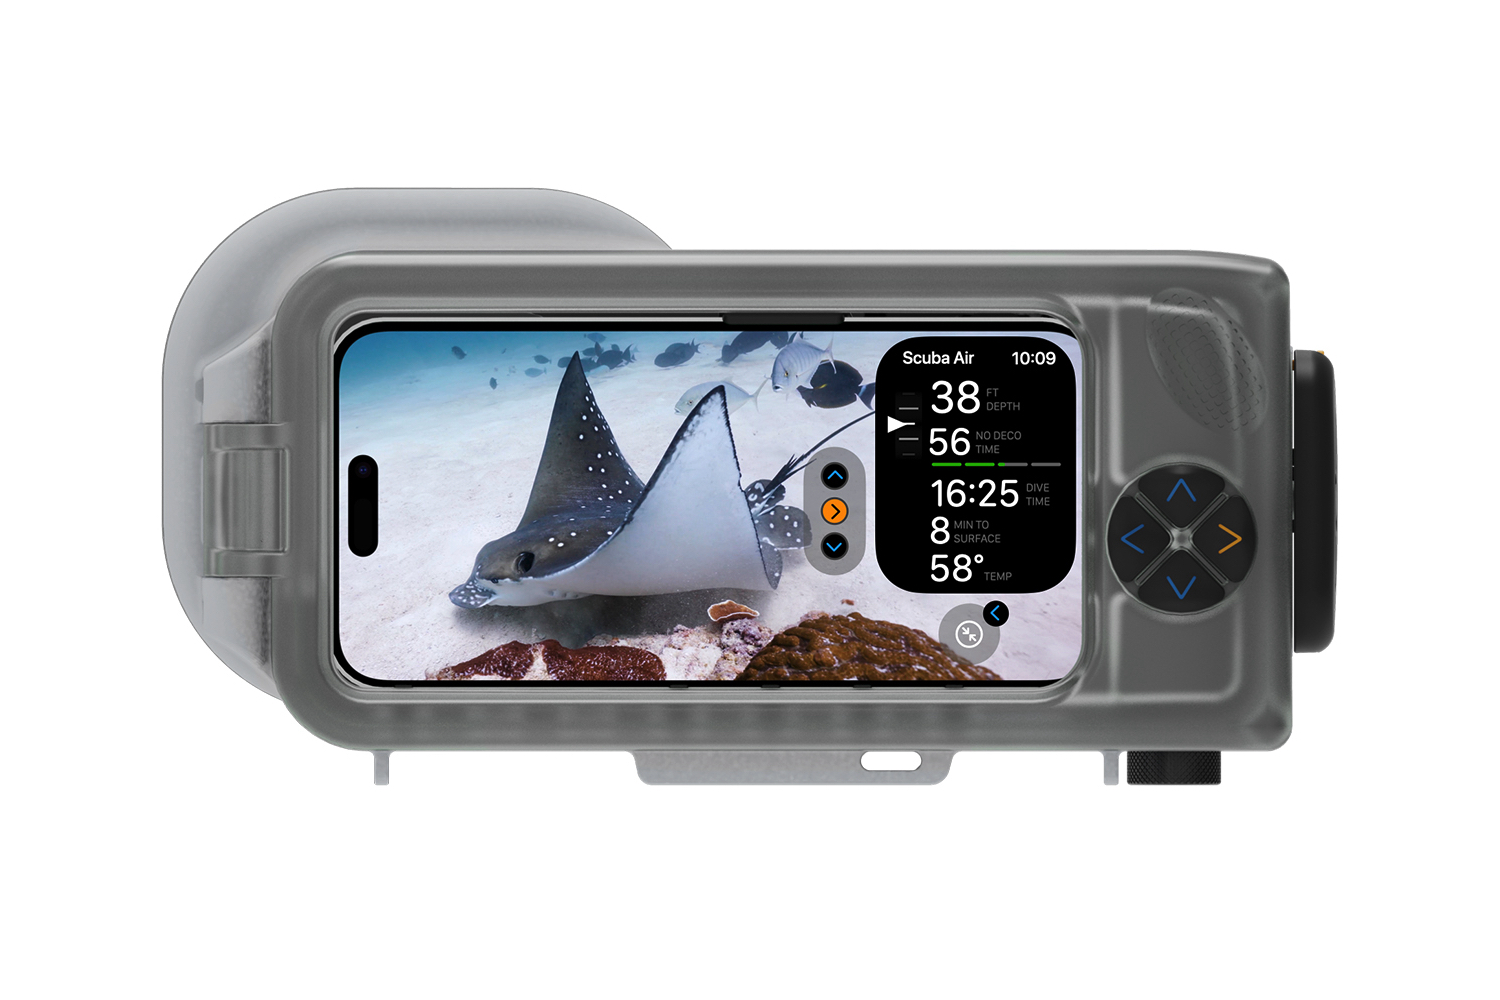 The Oceanic+ app on an iPhone inside the Dive Housing case.